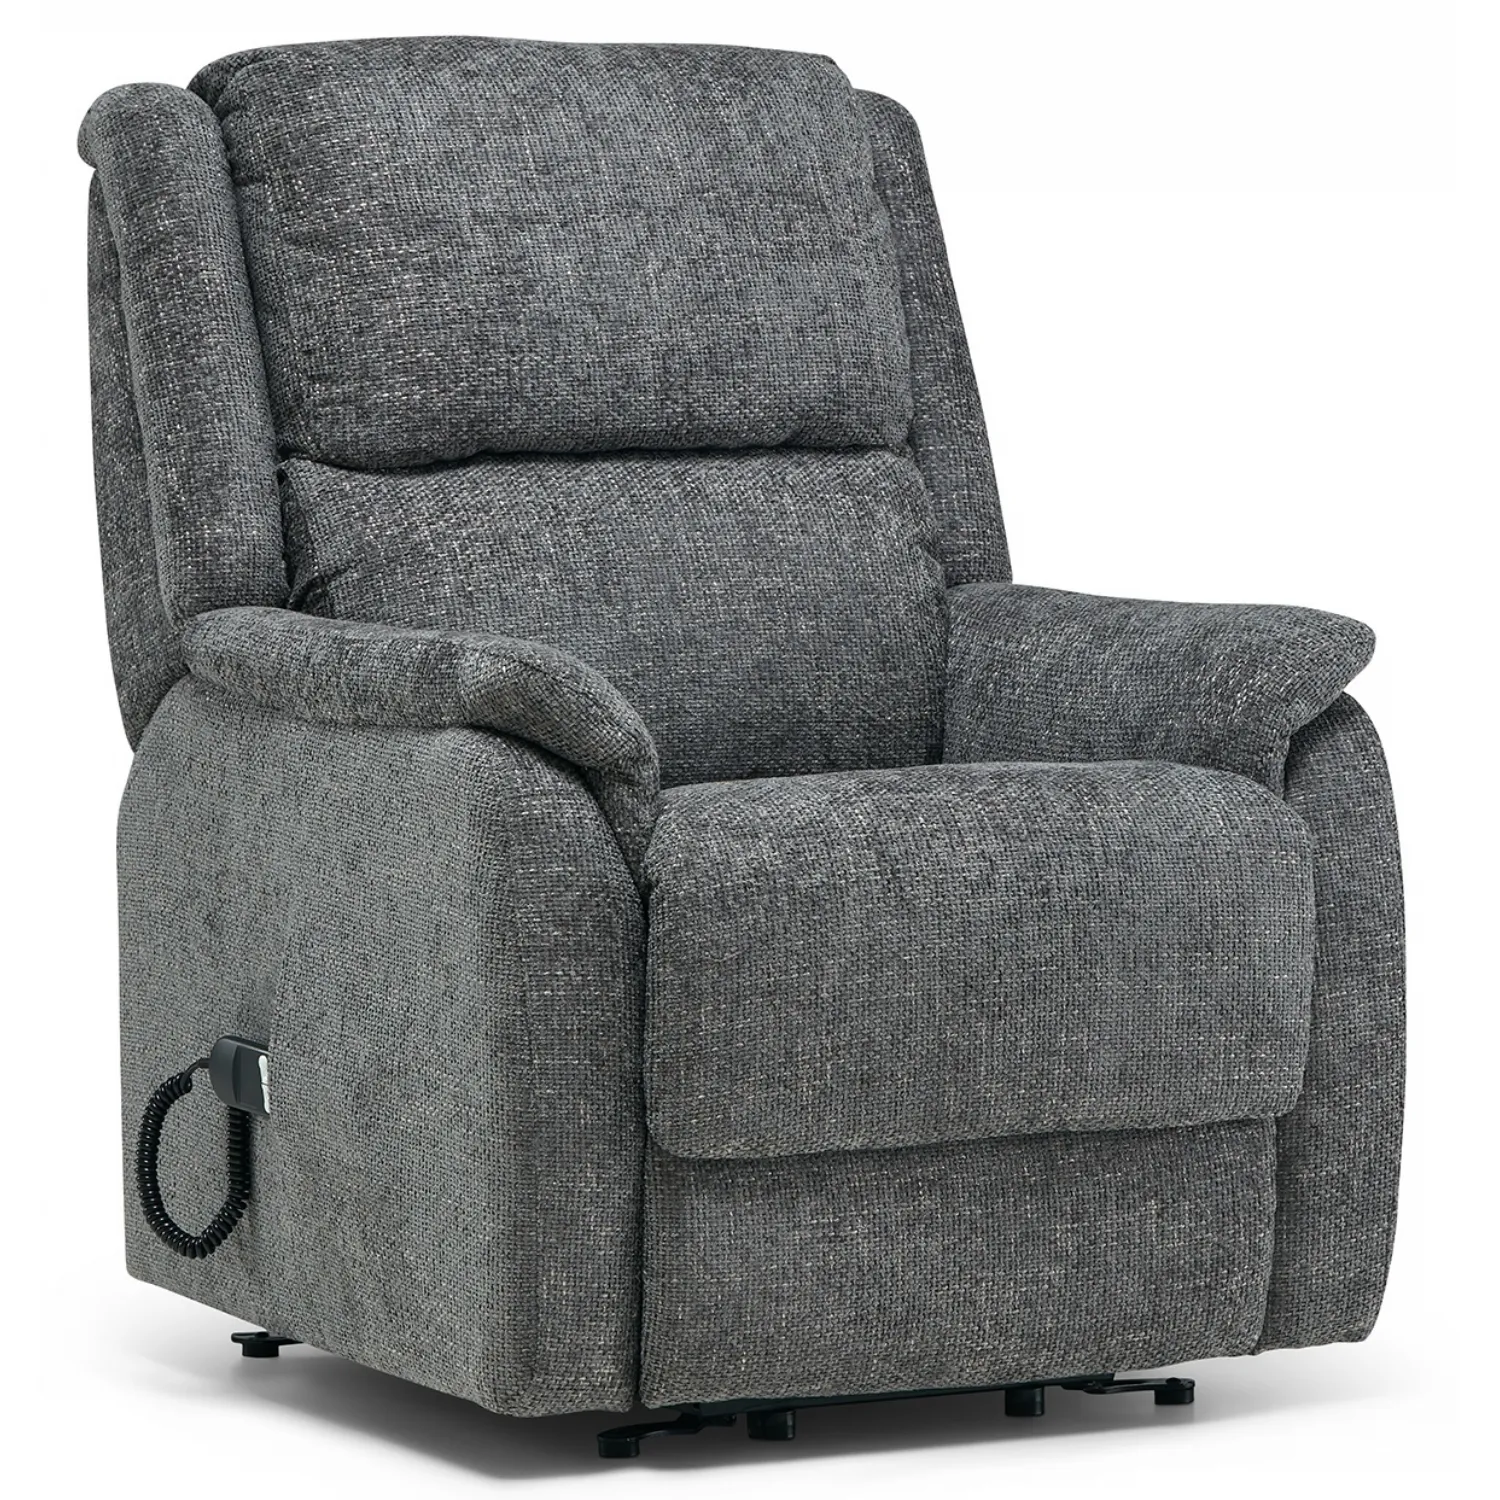 Dual Motor Lift and Rise Armchair in Grey or Stone Fabric